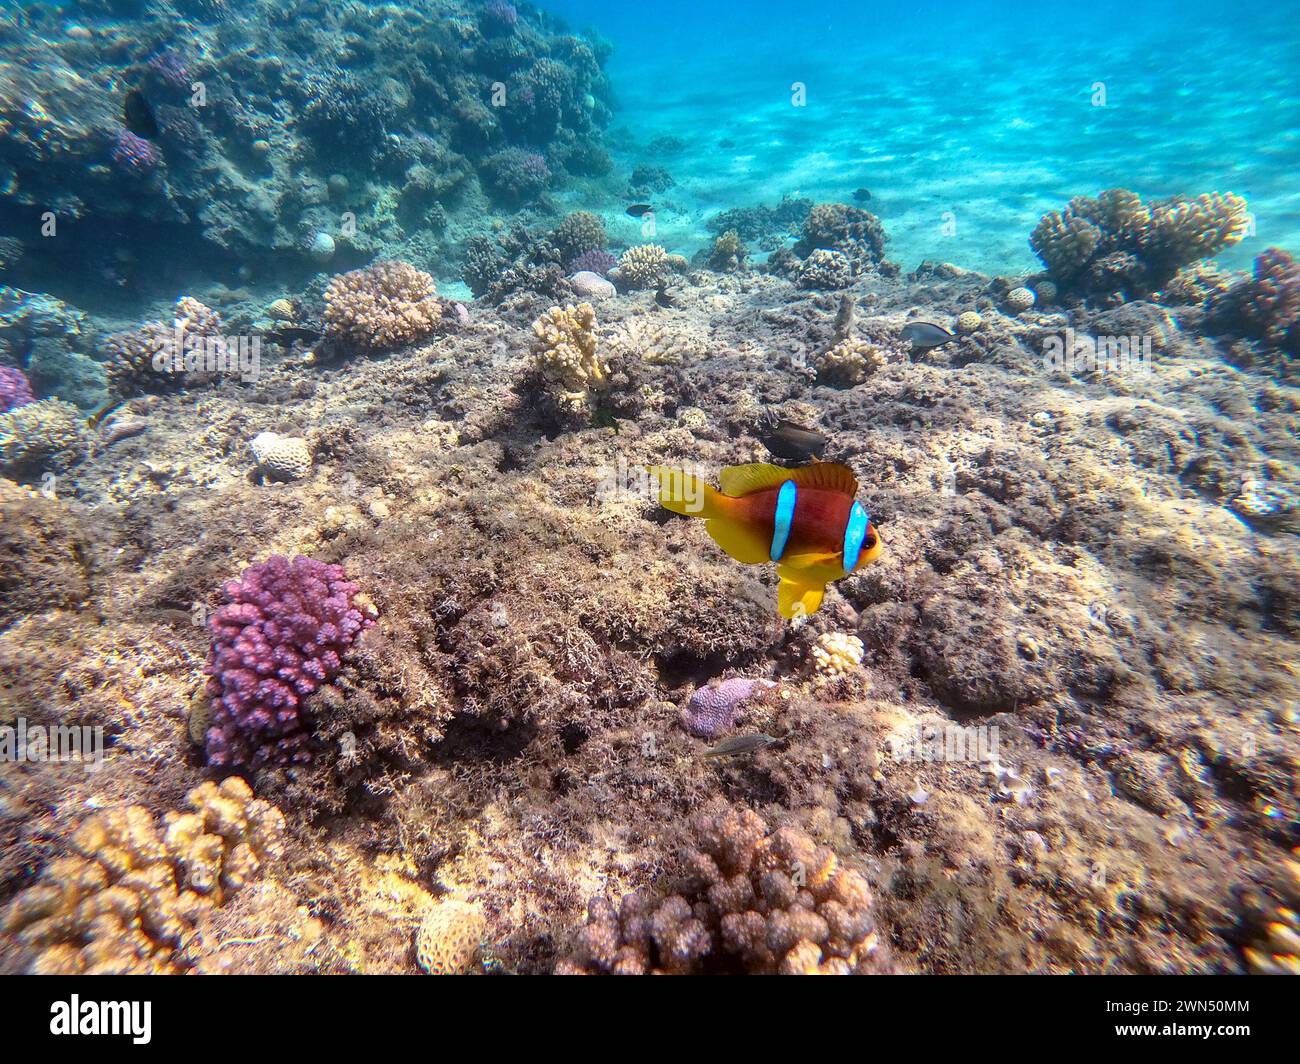 Close up view of Colorful tropical fish Red sea clown fish or amphiprion bicinctus (Amphiprion Inae) underwater at the coral reef. Underwater life of Stock Photo